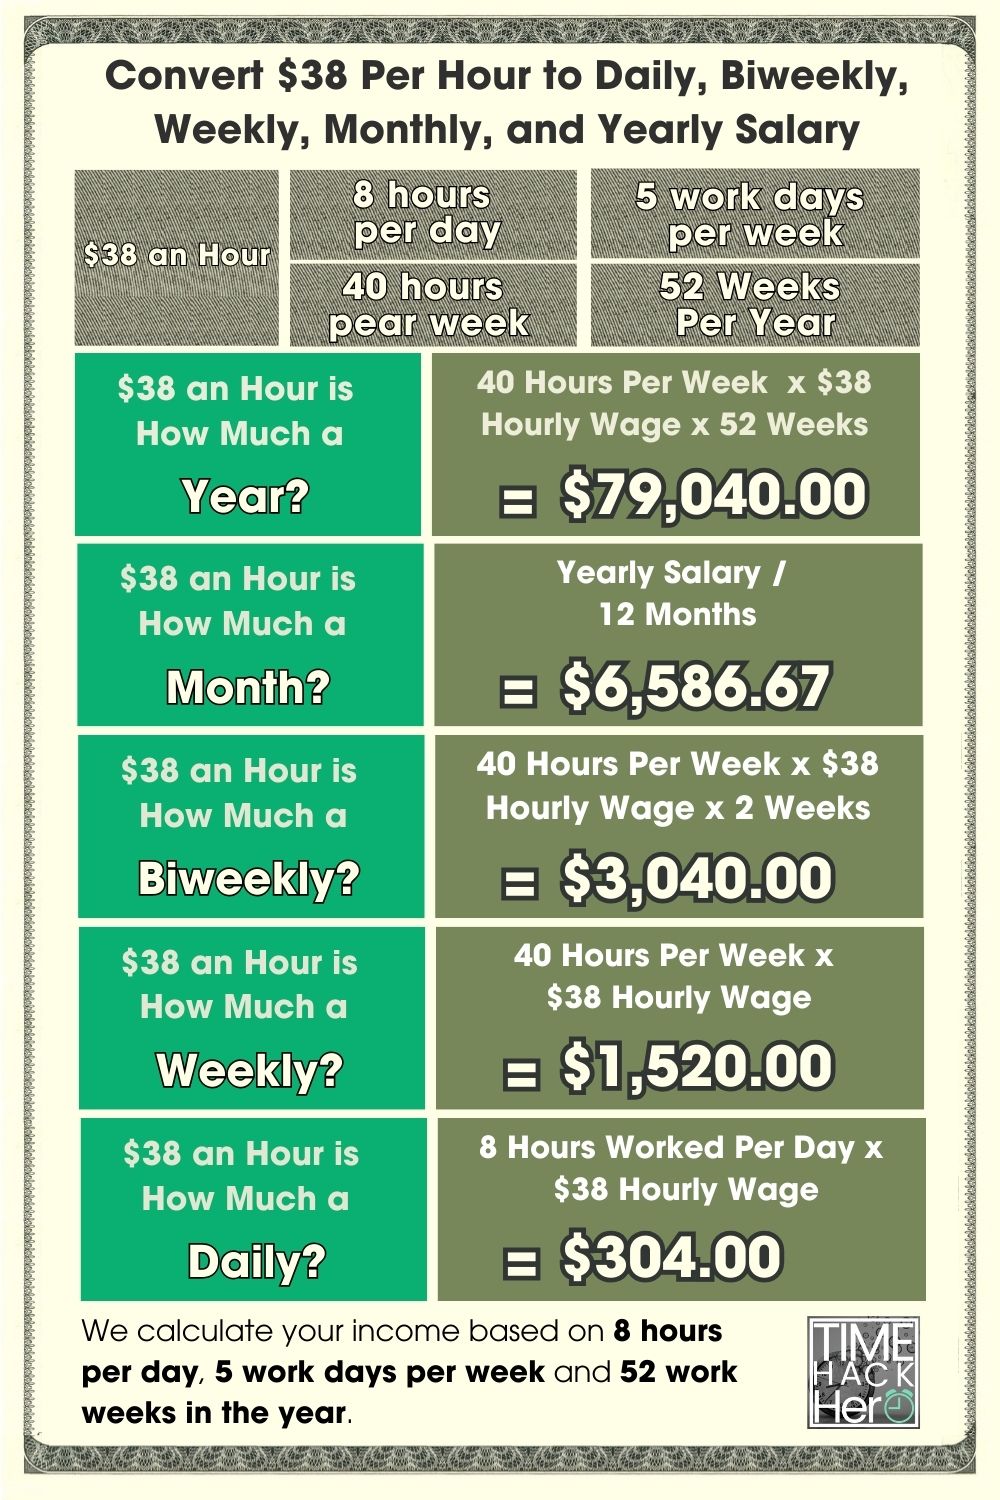 Convert $38 Per Hour to Daily, Biweekly, Weekly, Monthly, and Yearly Salary